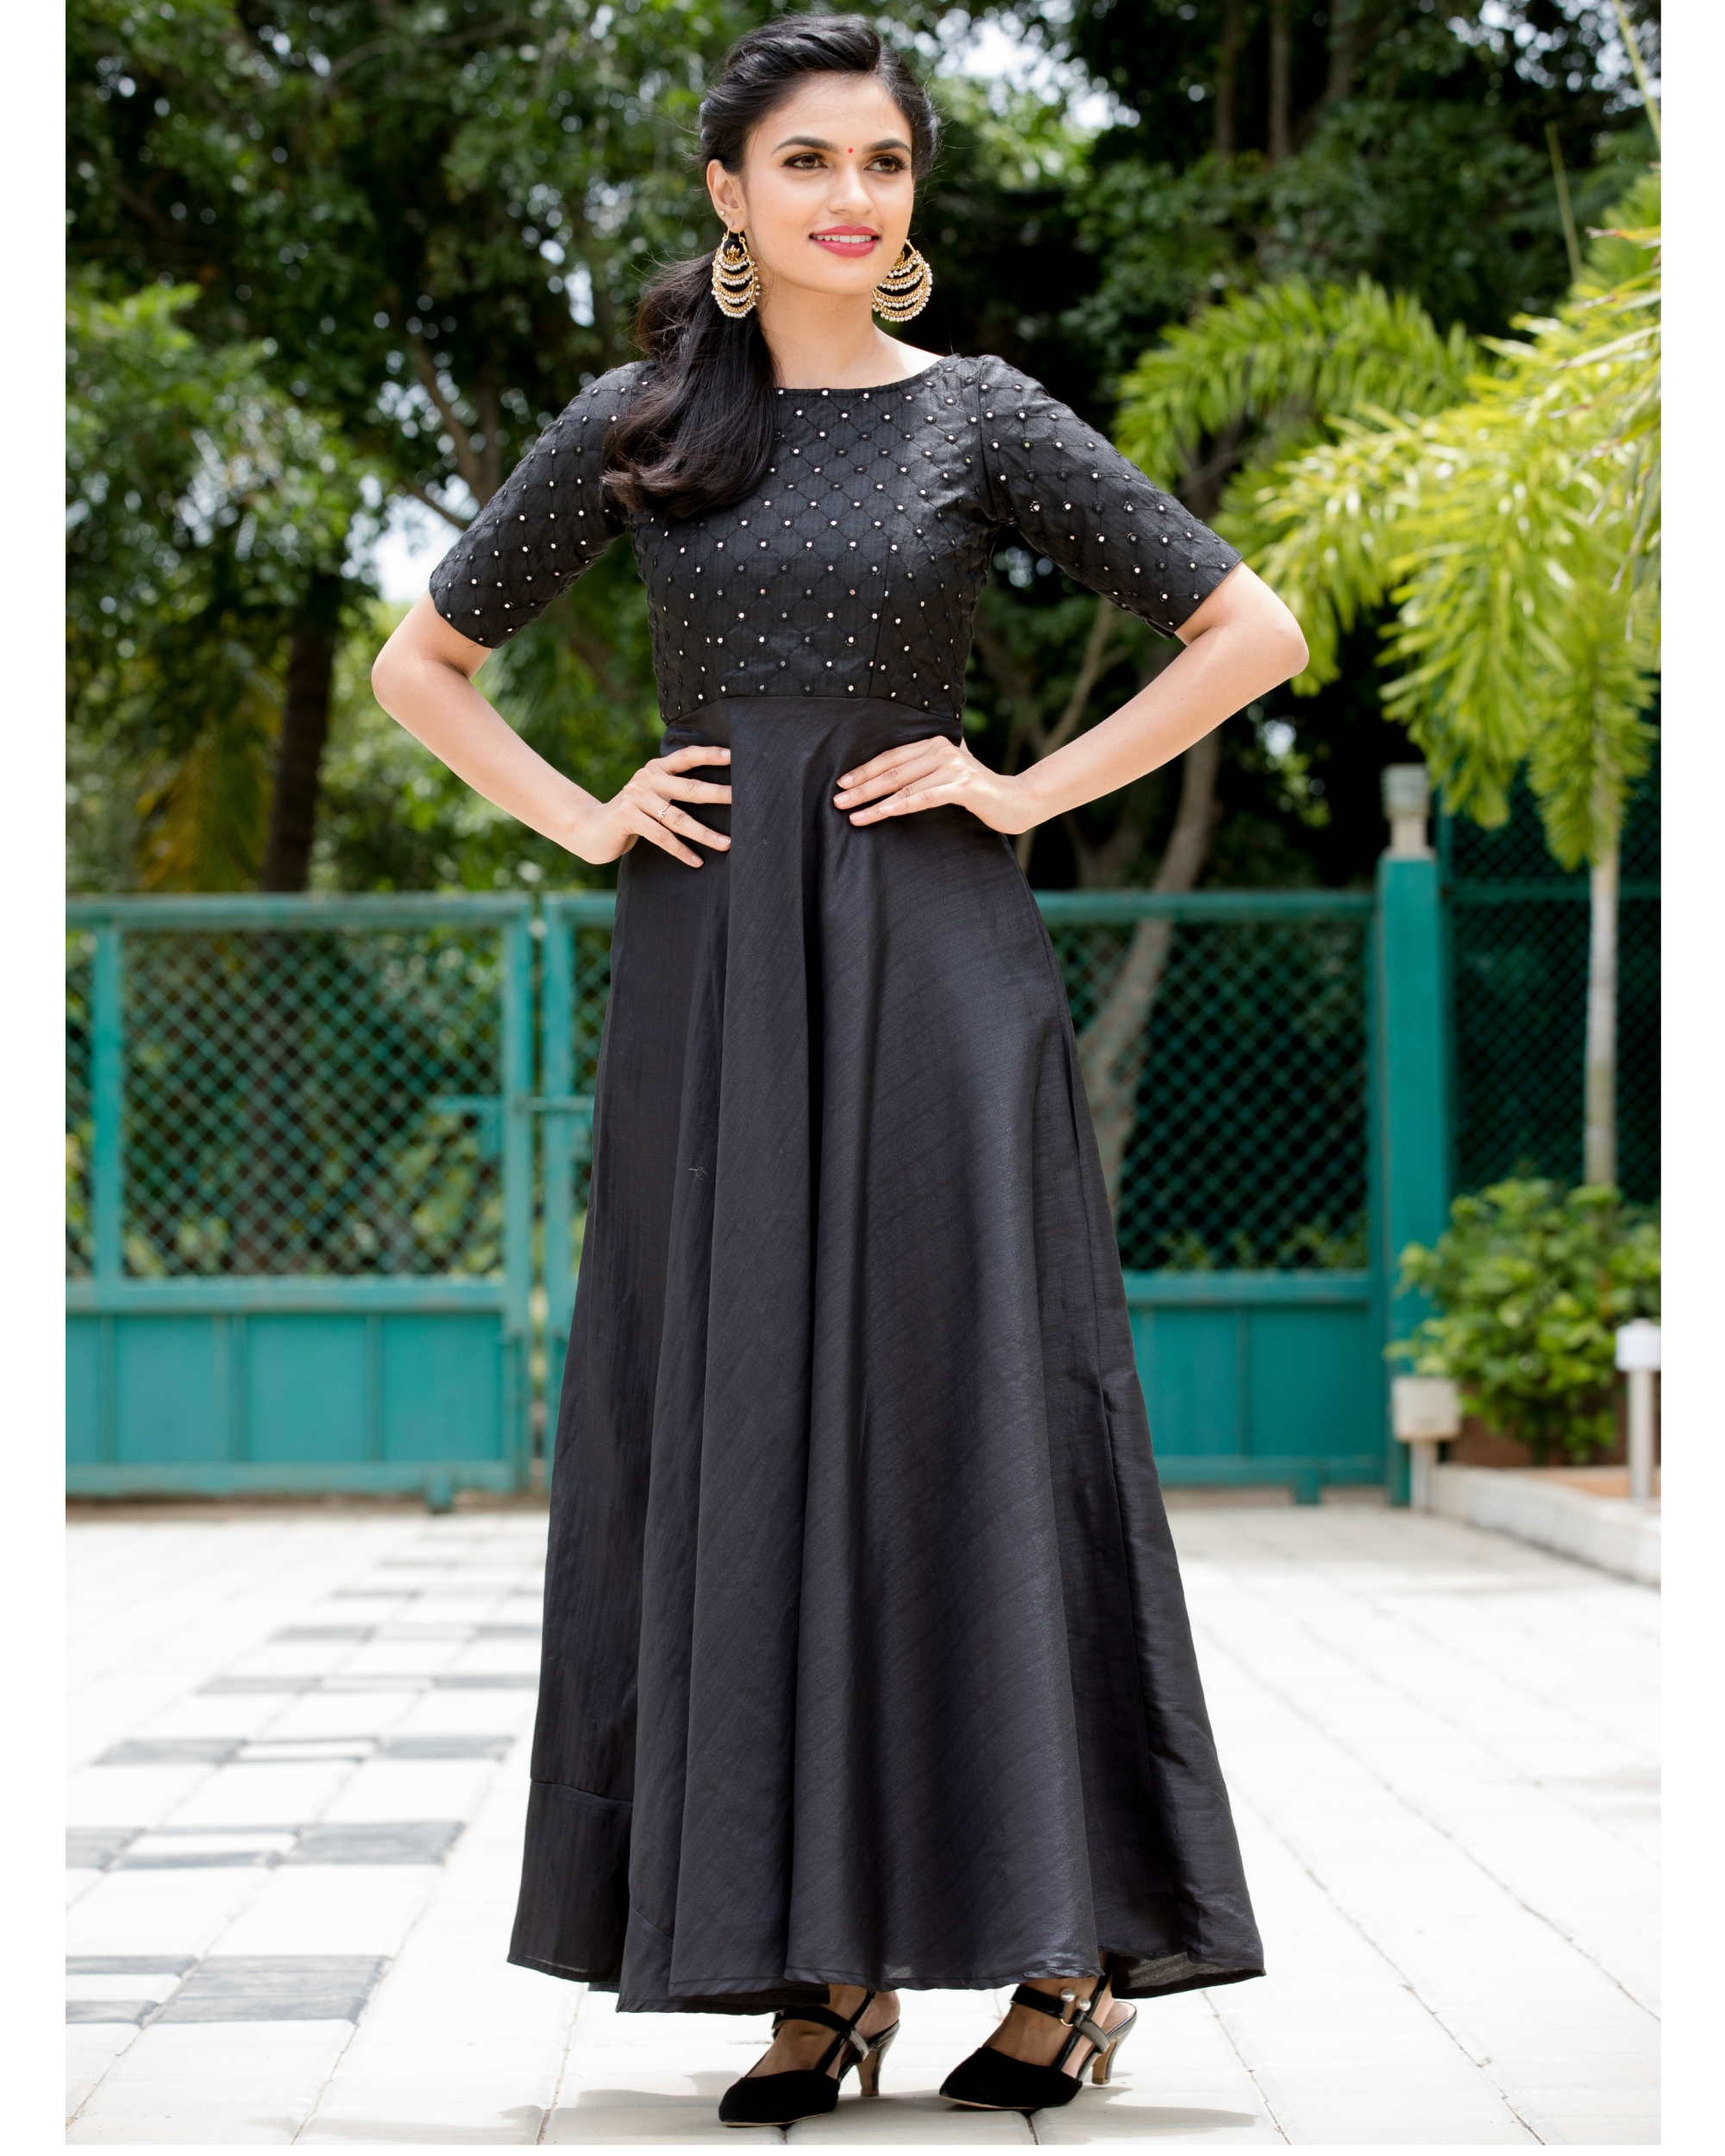 NEW TAMANNA QUEEN COLLECTION BLACK BANARES GOWN WITH DUPATTA FOFGM001   wwwsoosicoin